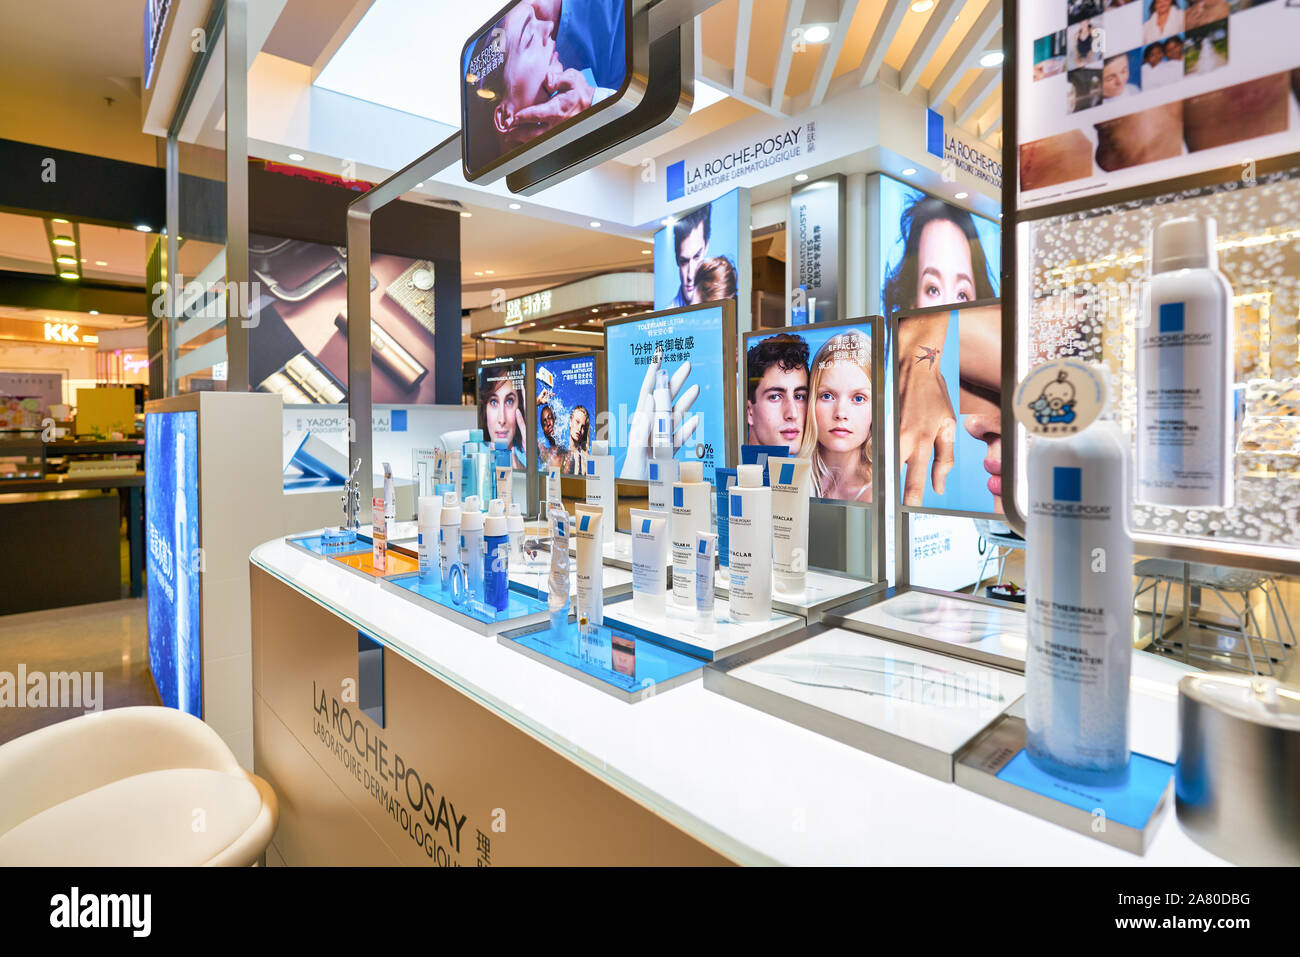 SHENZHEN, CHINA - CIRCA APRIL, 2019: La Roche-Posay Laboratoire Dermatologique products on display at a shopping mall in Shenzhen Stock Photo